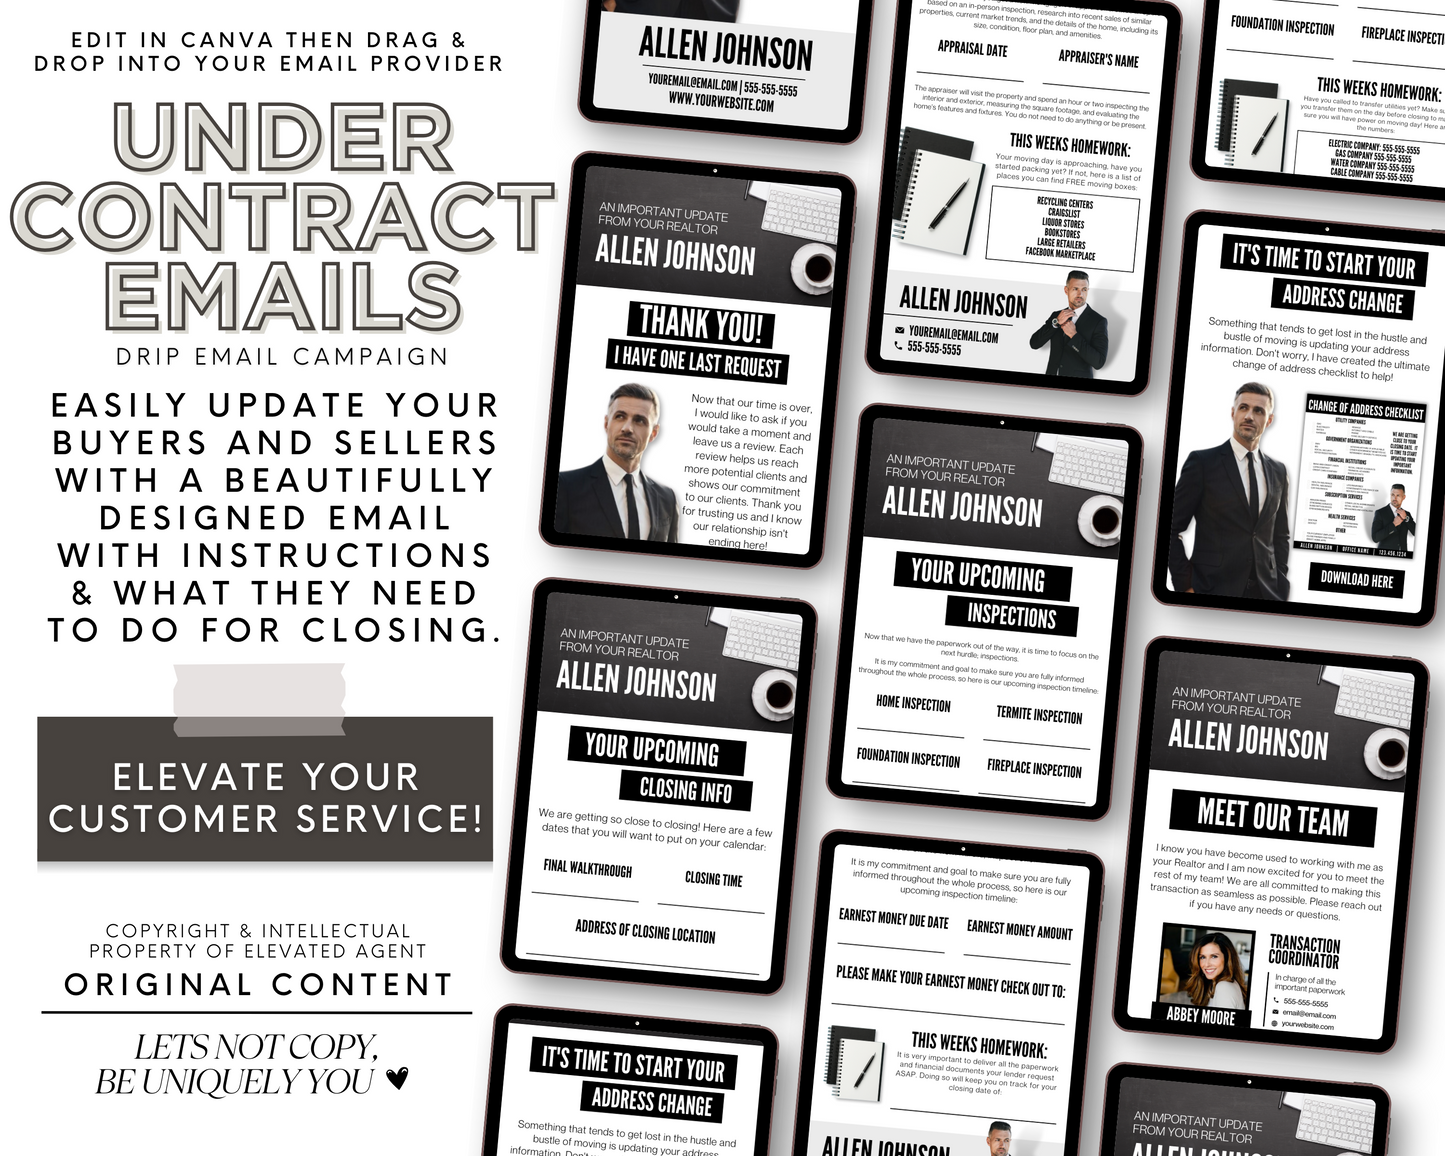 Under Contract Email Drip